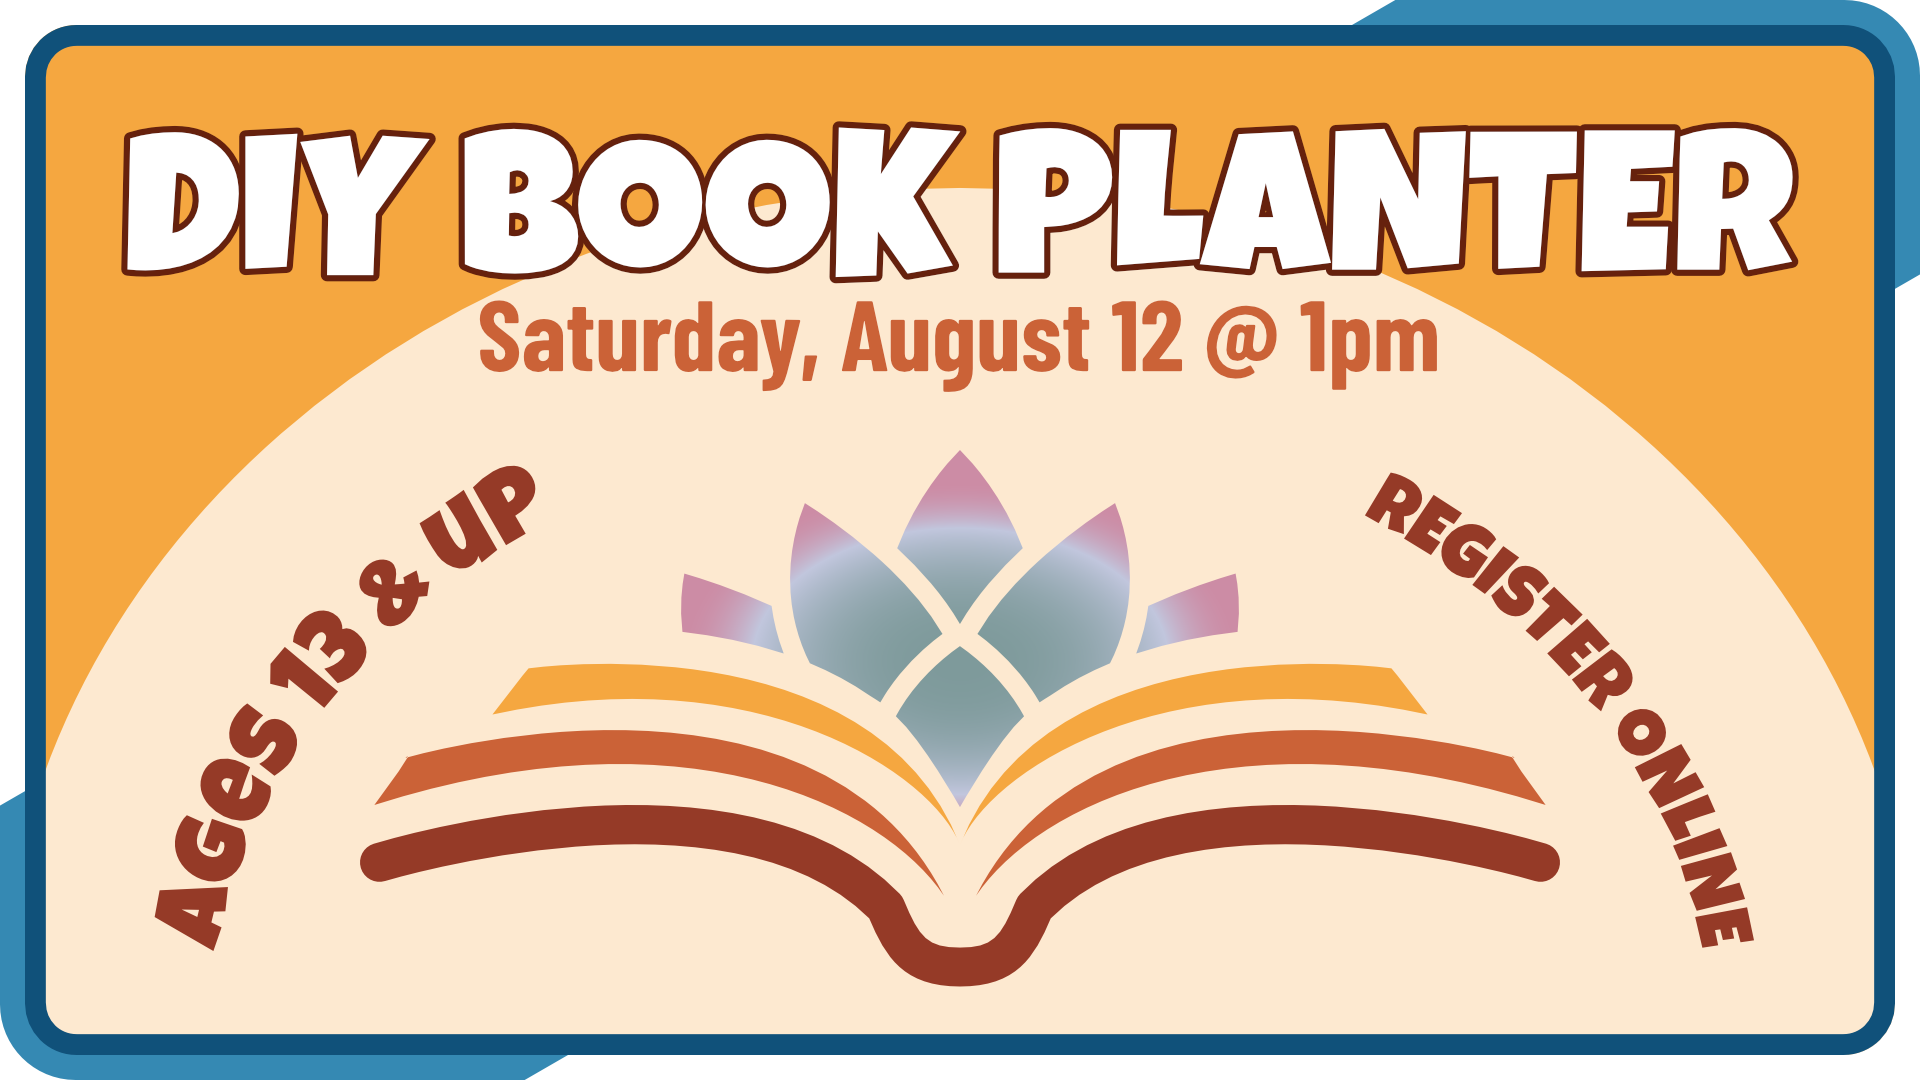 DIY Book Planter, August 12 at 1pm, ages 13 and up, registration required